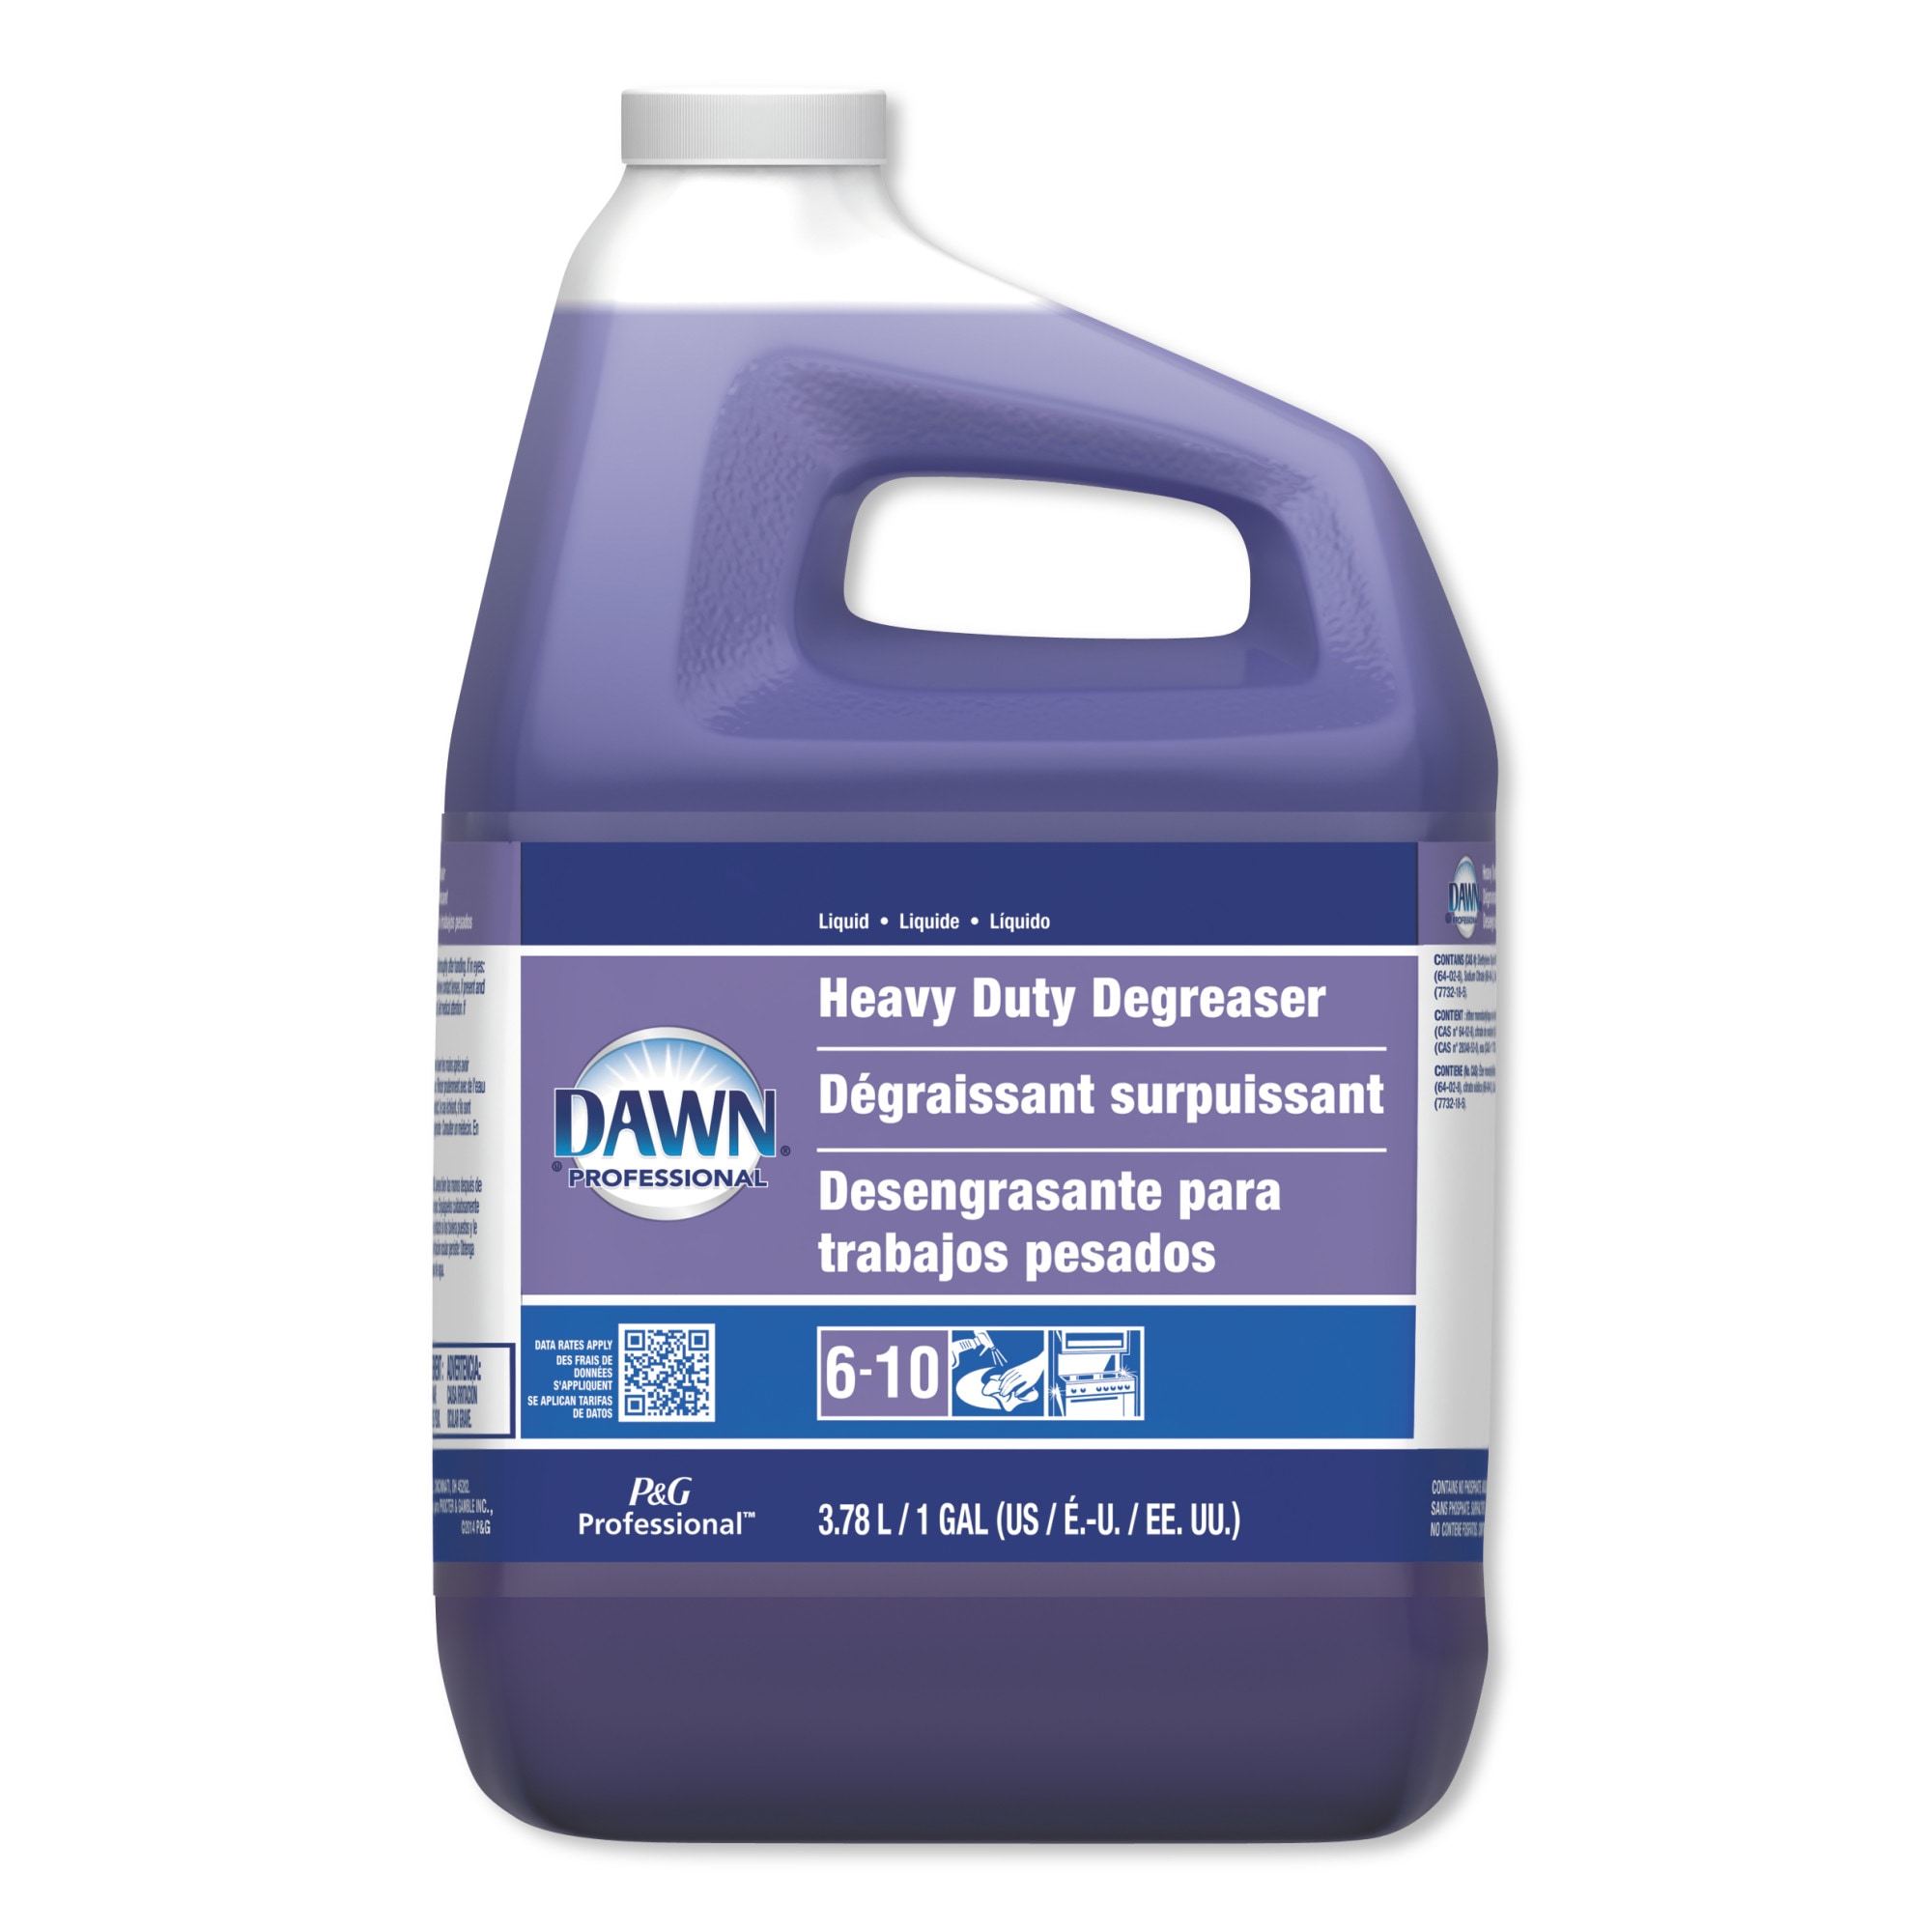 Maintex Professional 1-Gallon Degreaser in the Degreasers department at